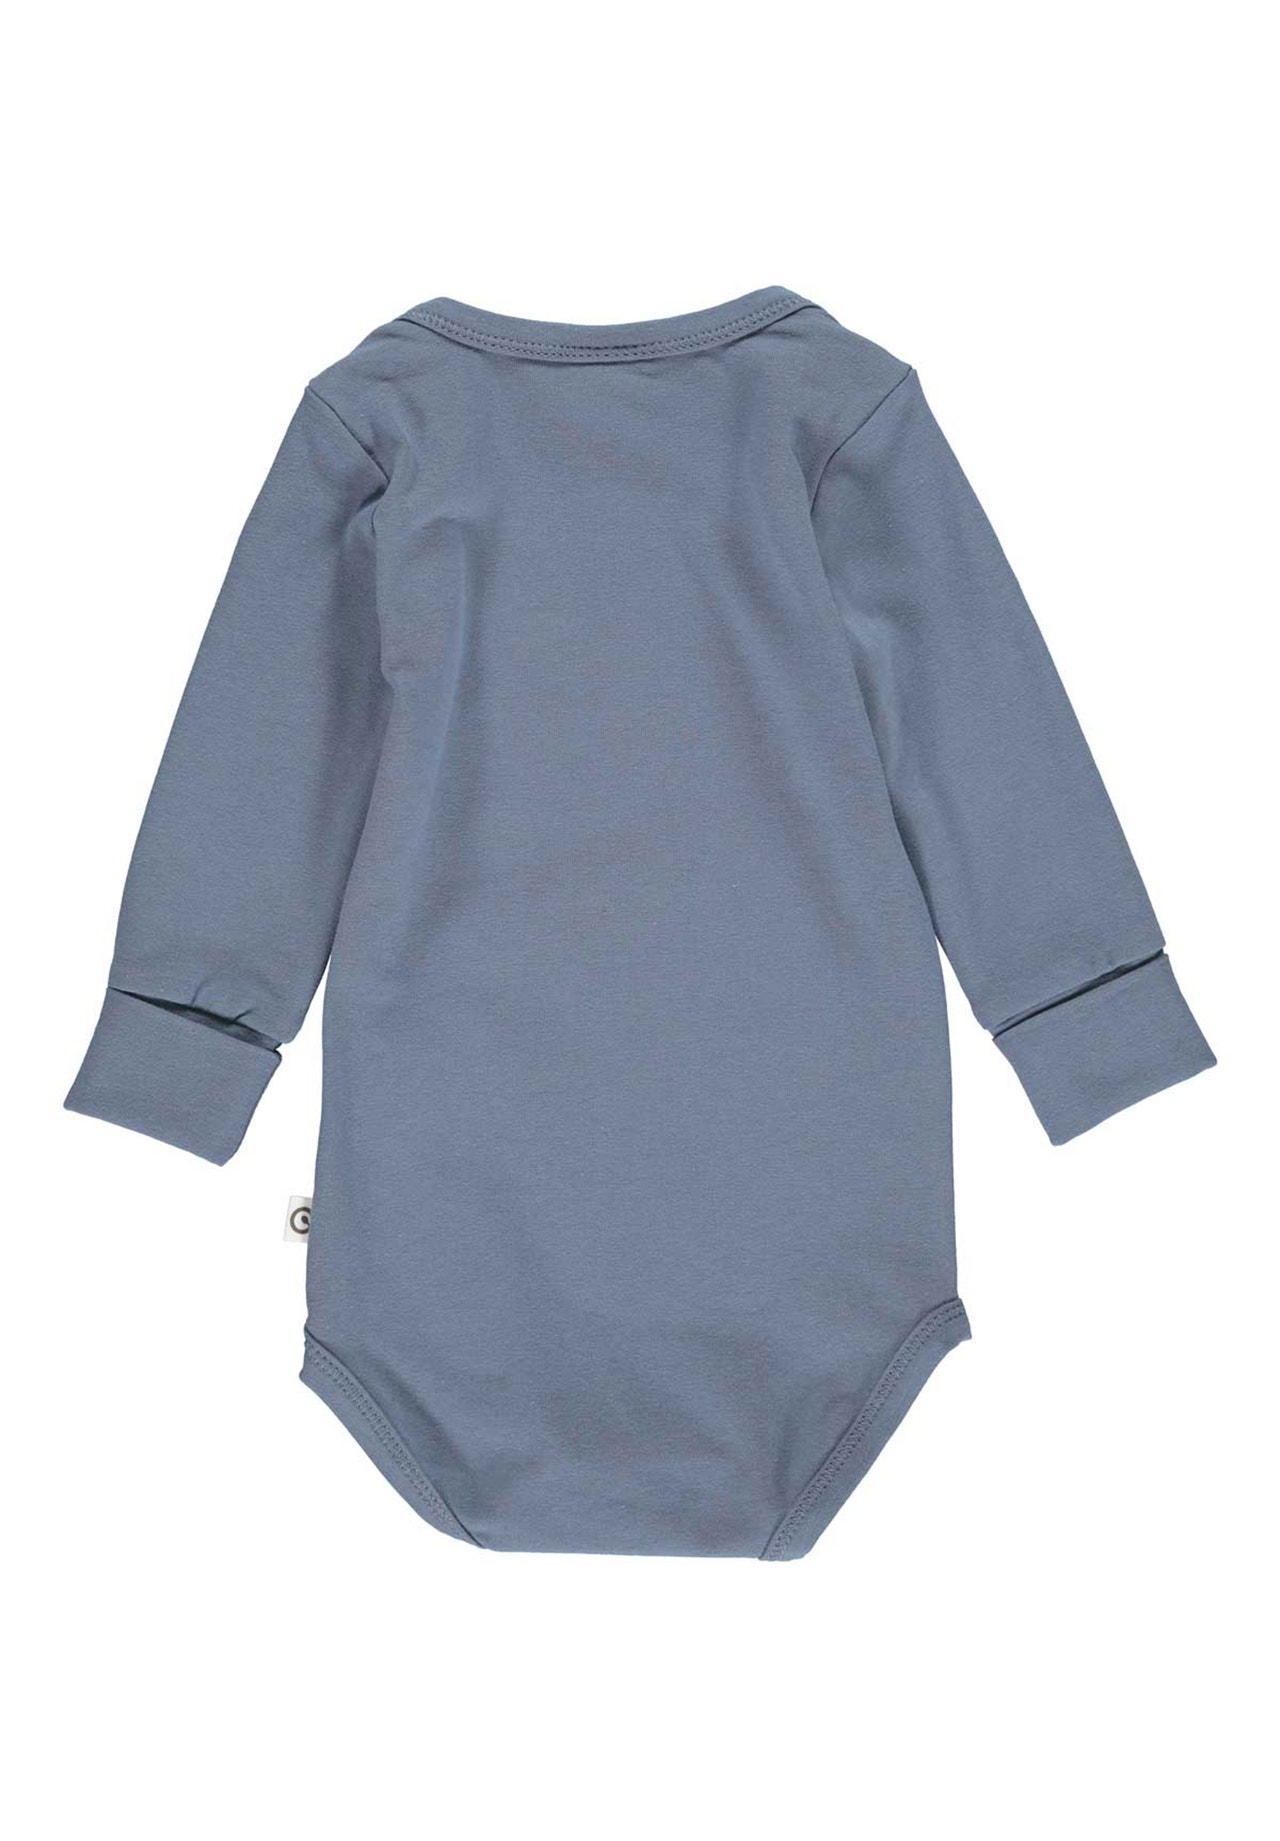 MAMA.LICIOUS Baby-romper -Dusty Blue - 1582014200